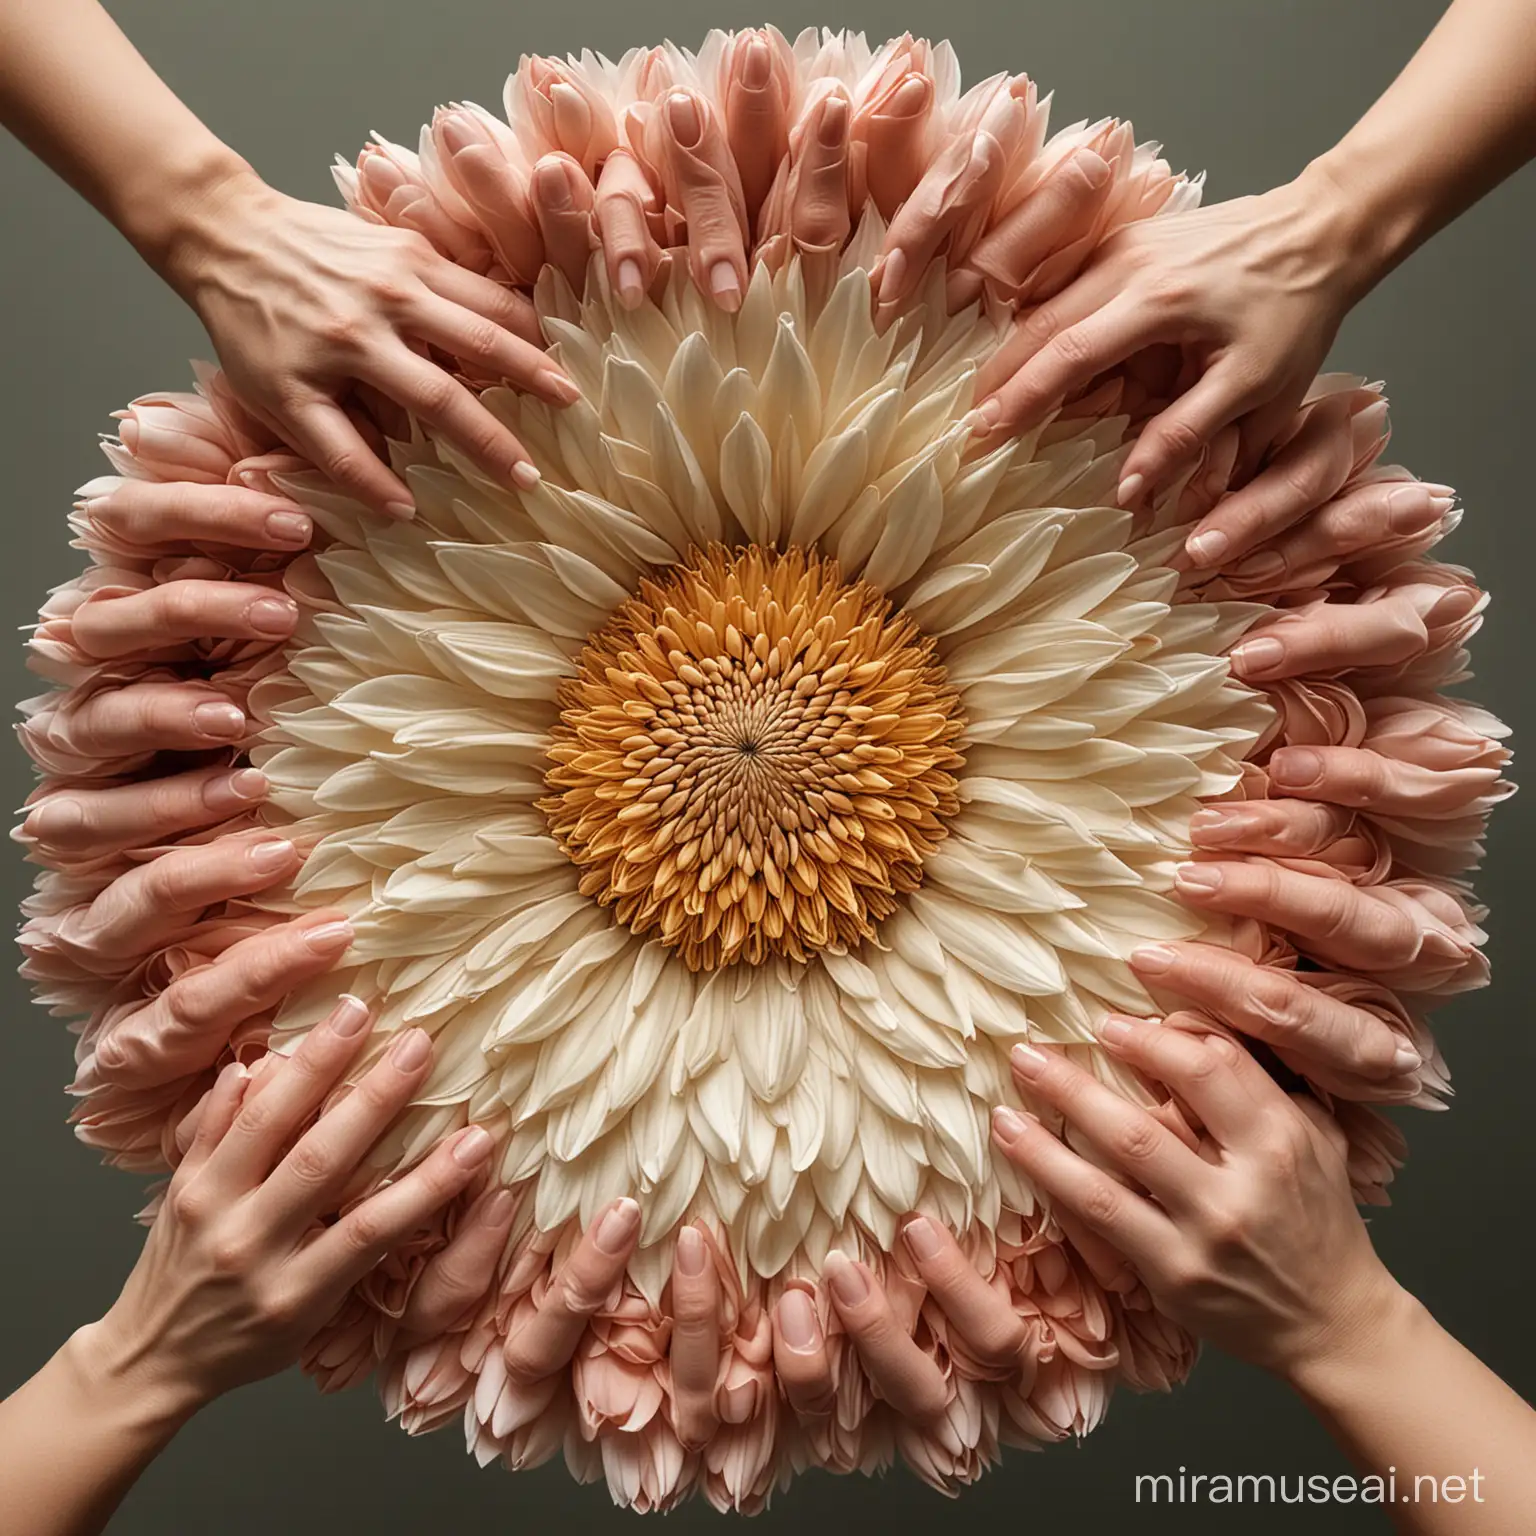 Exquisite Human Hands Forming Lush Floral Structure